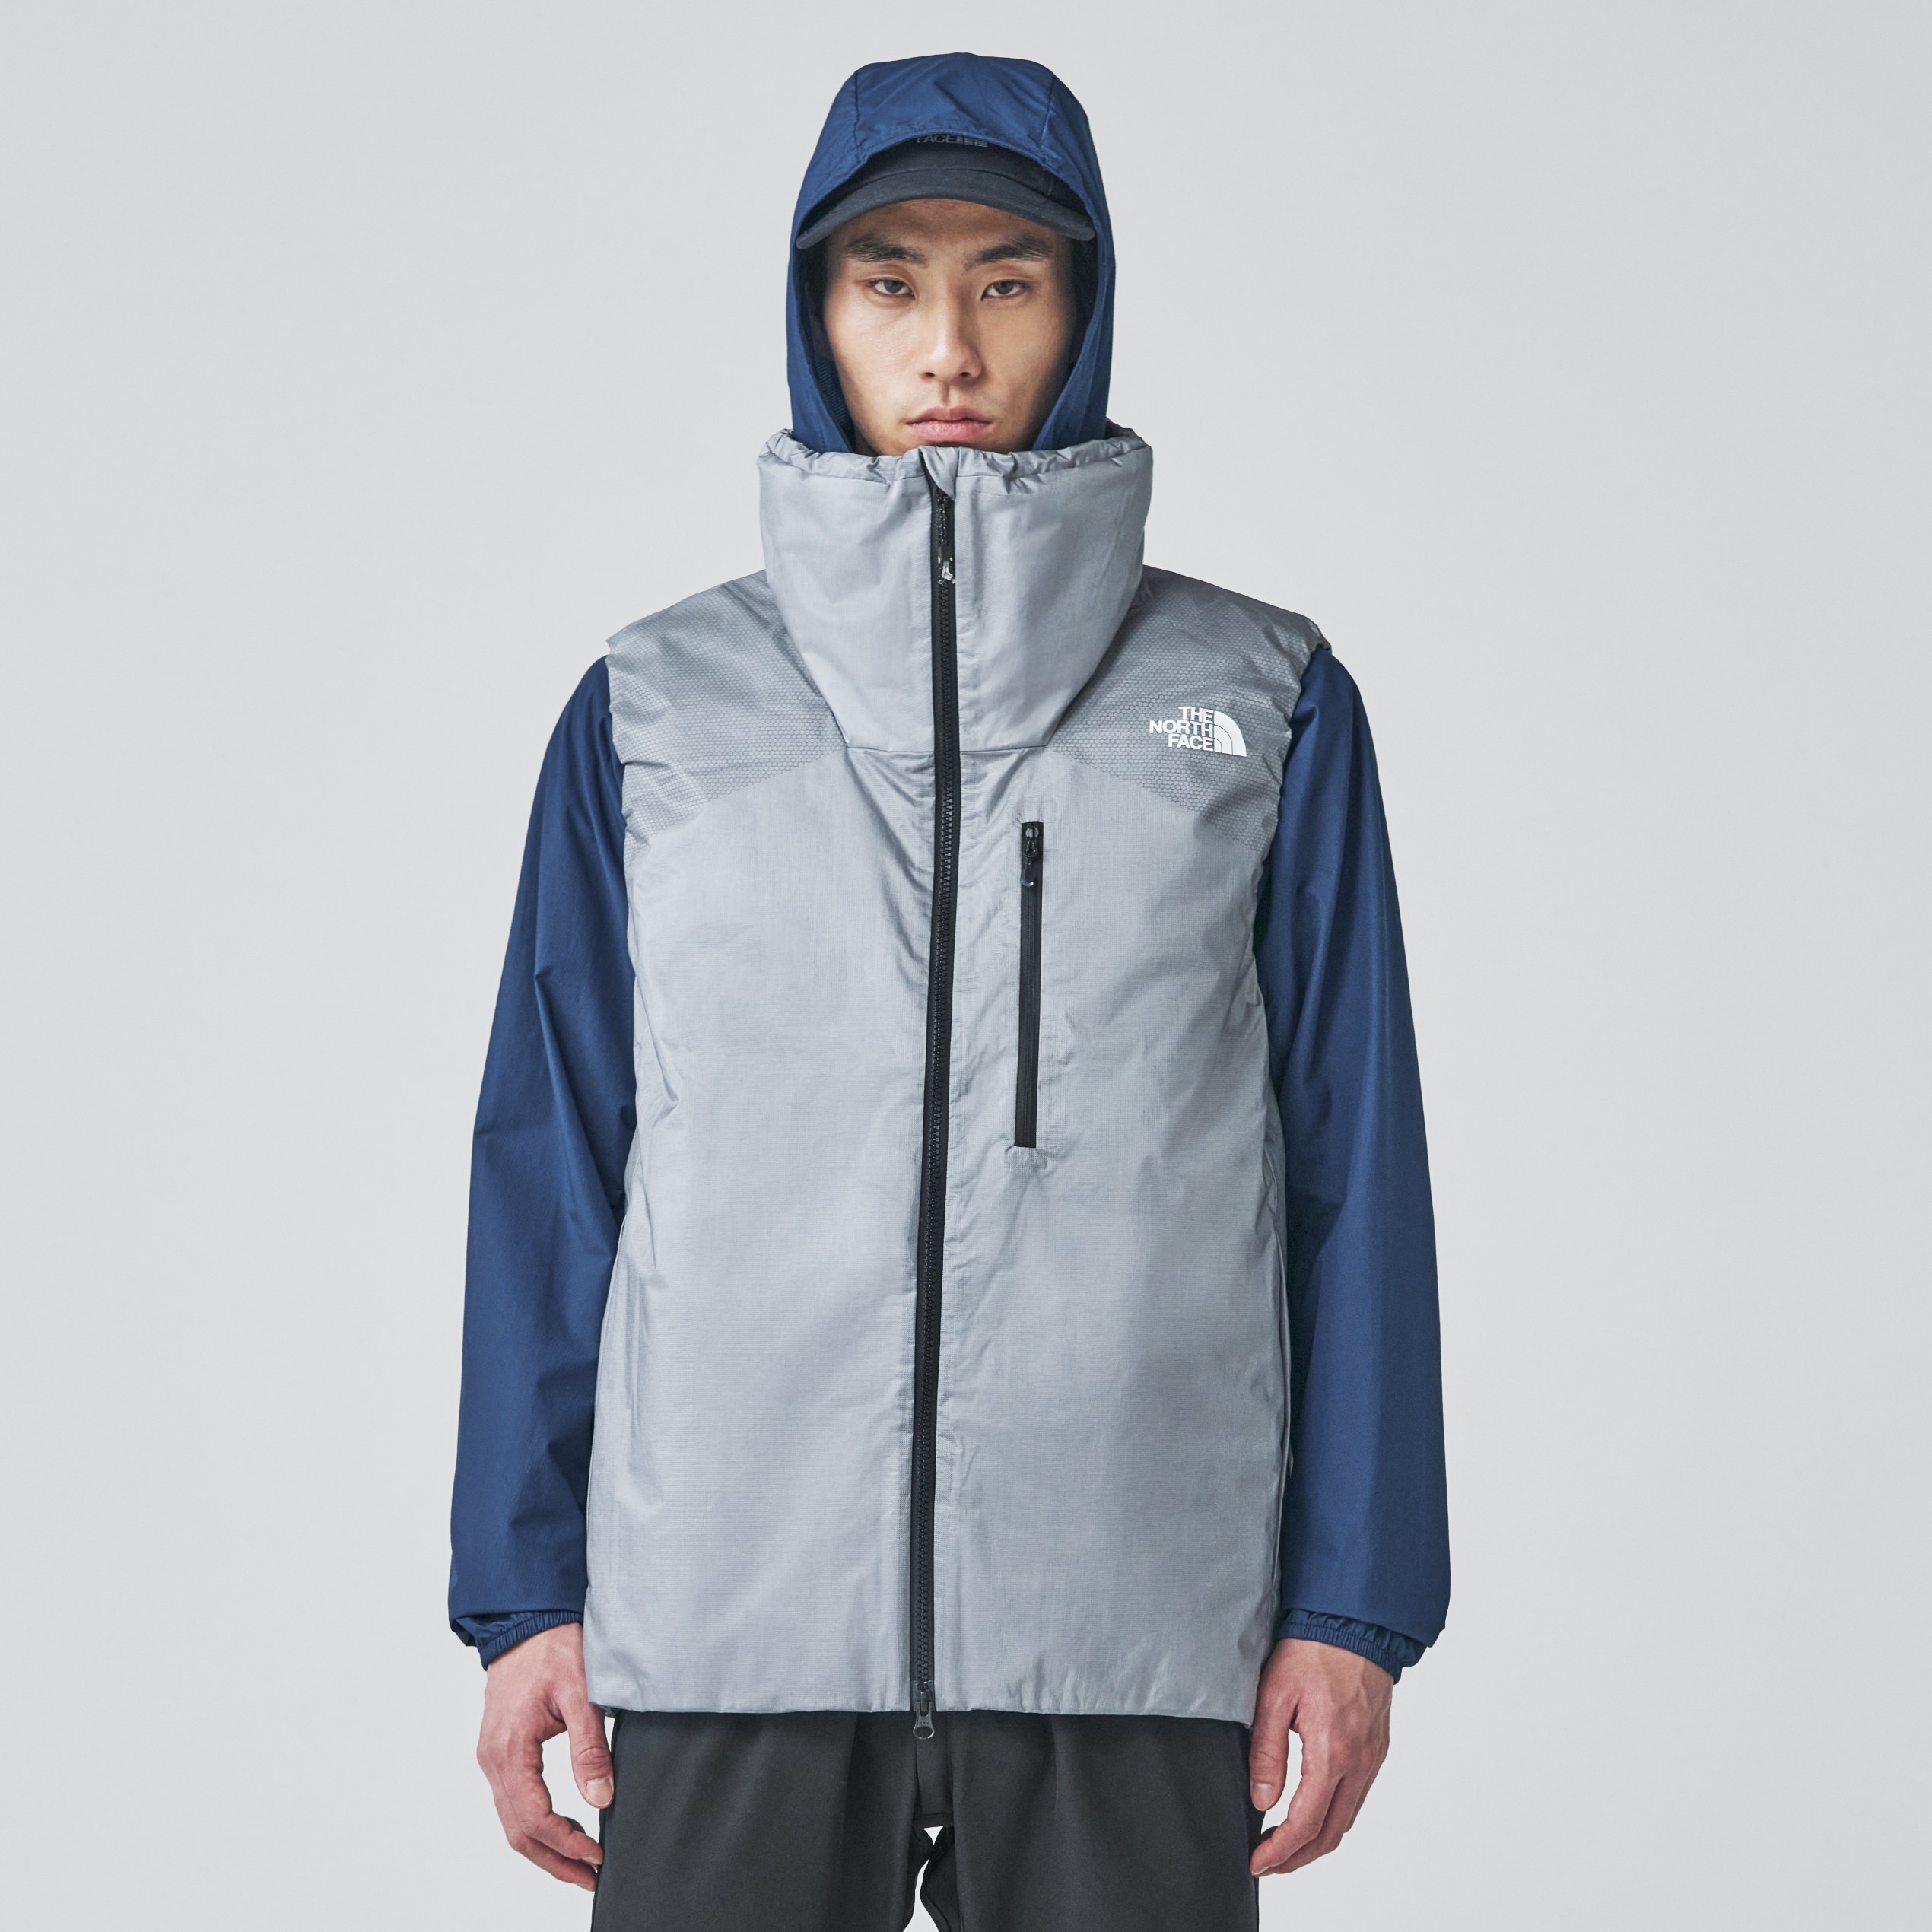 HEDGE OVER VEST (NY82001 / UNISEX) - THE NORTH FACE MOUNTAIN